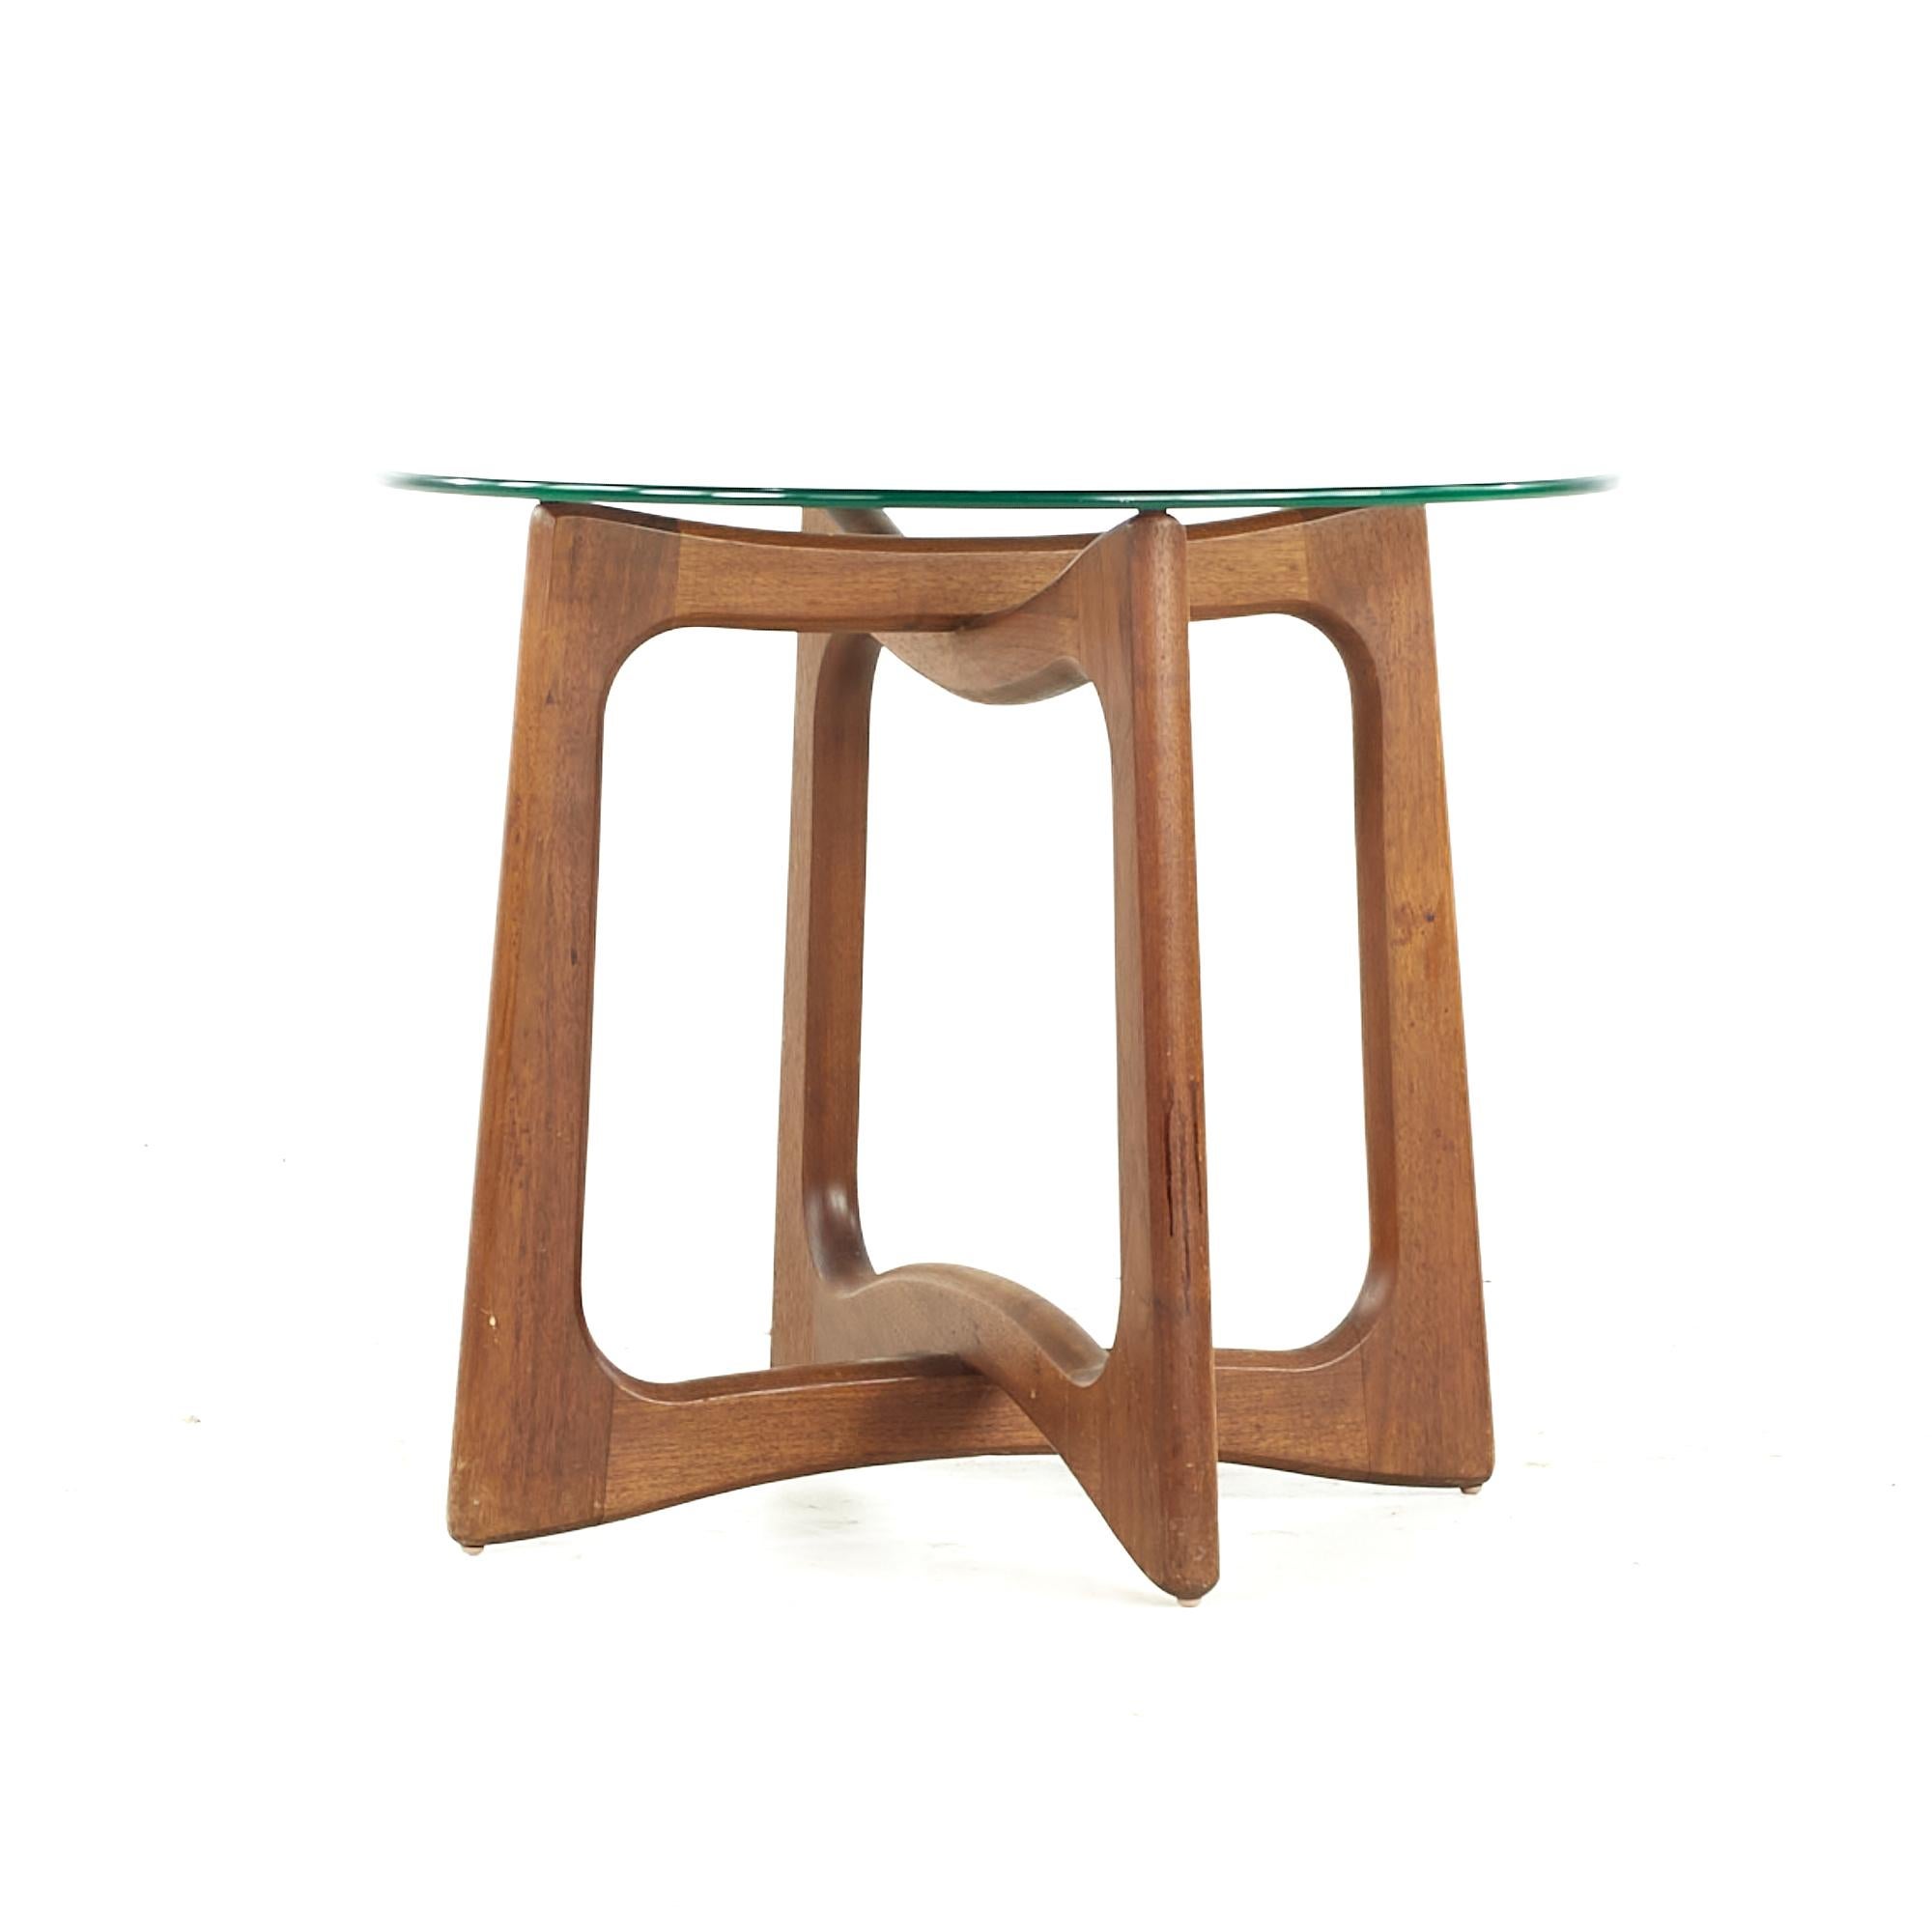 Adrian Pearsall Midcentury Walnut and Glass Side Tables, Pair For Sale 2